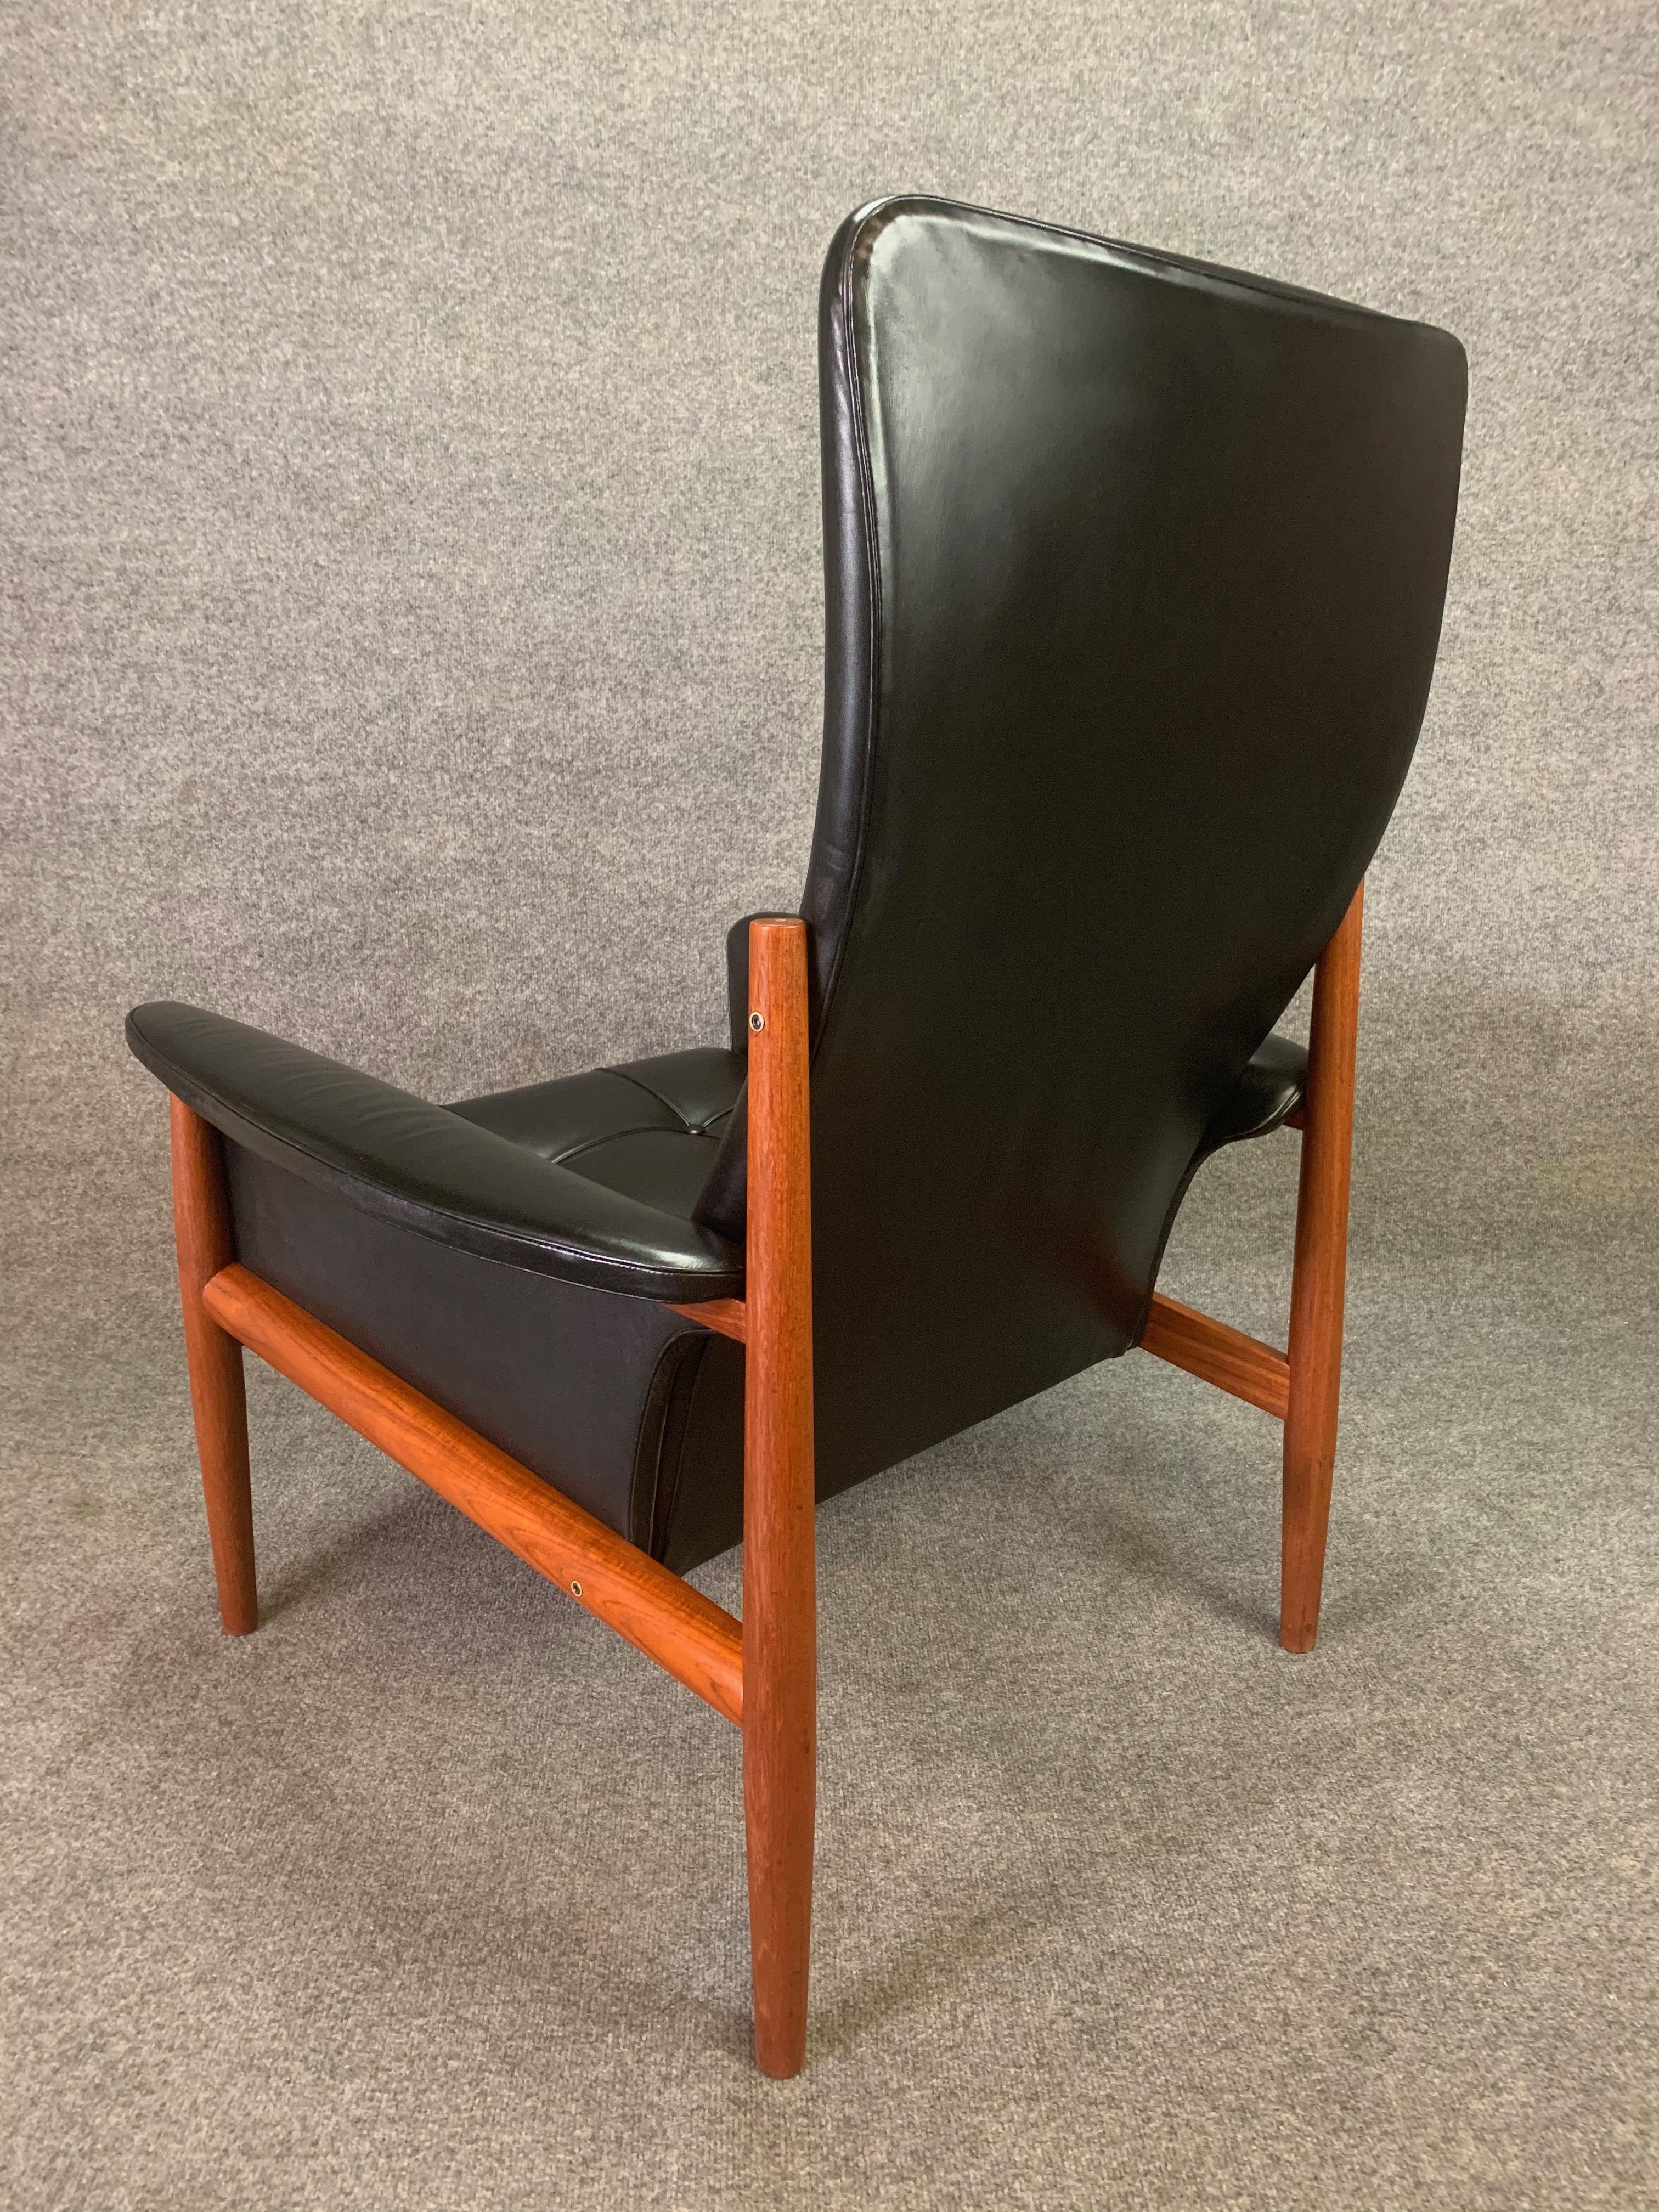 Woodwork Vintage Danish Midcentury Teak and Leather Lounge Chair by Grete Jalk For Sale